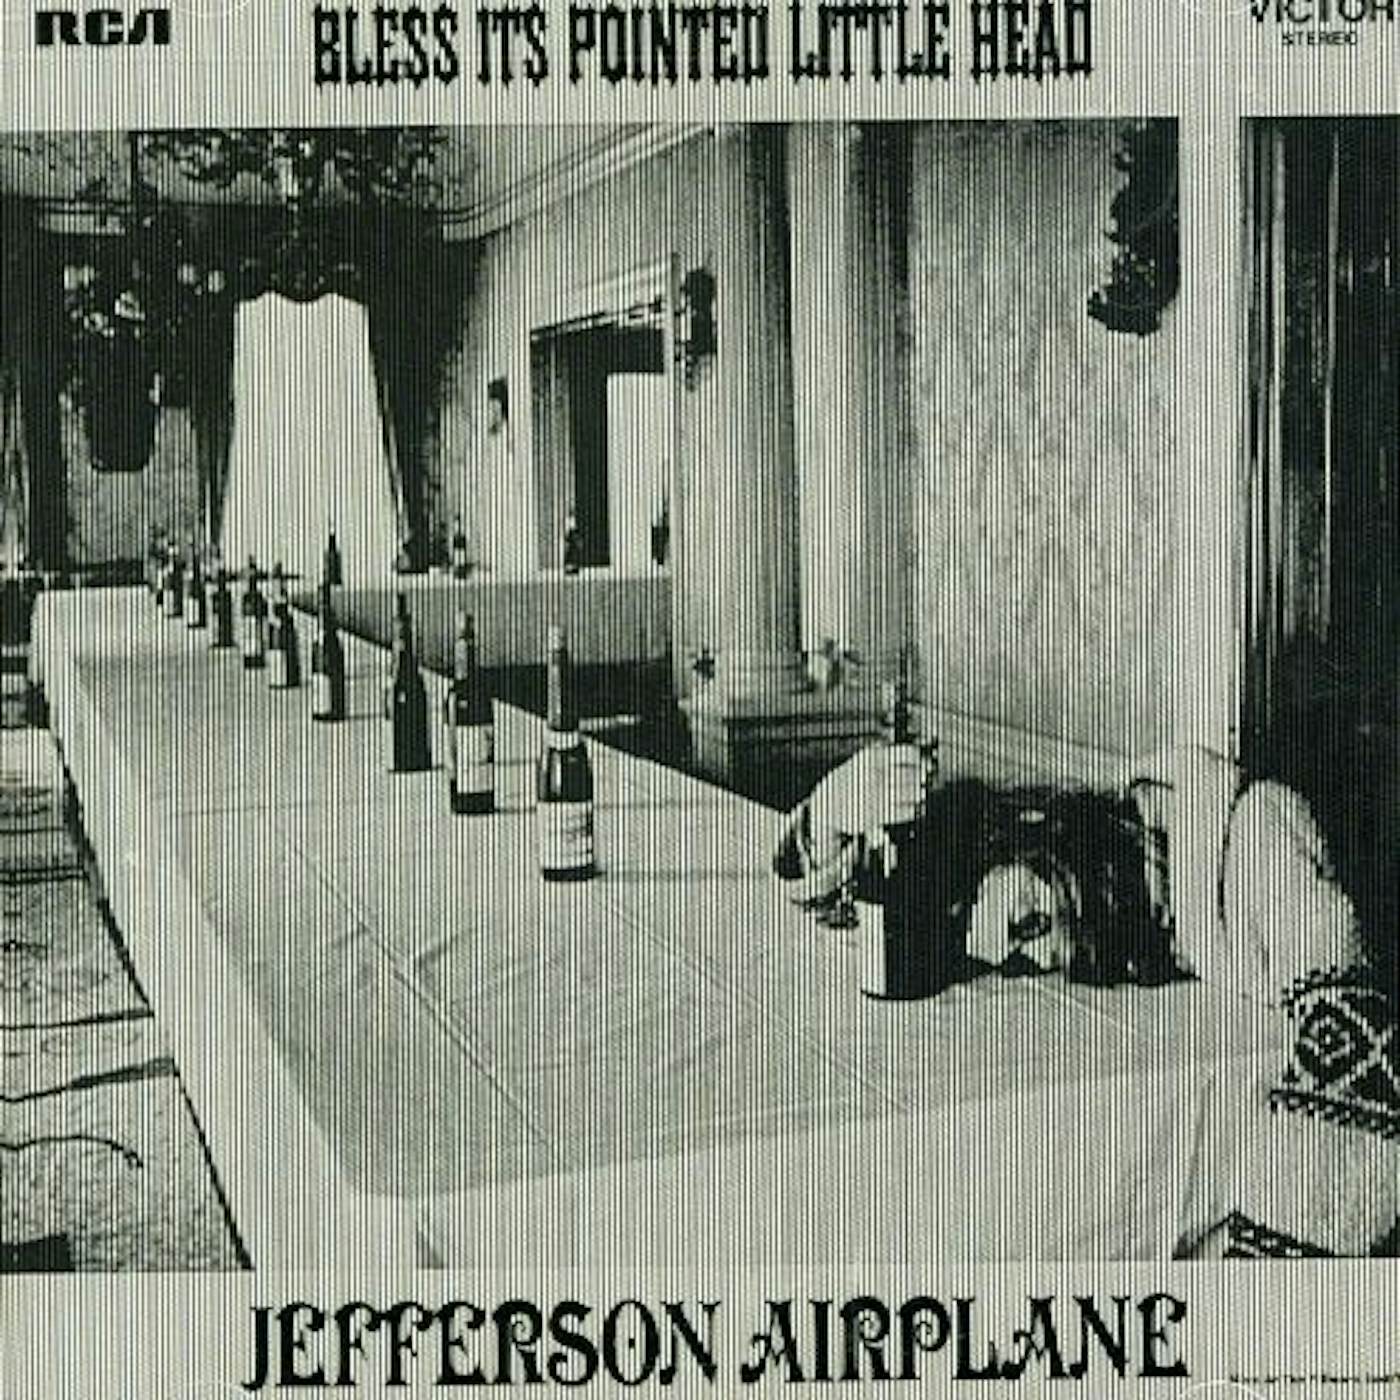 Jefferson Airplane BLESS ITS POINTED LITTLE HEAD CD